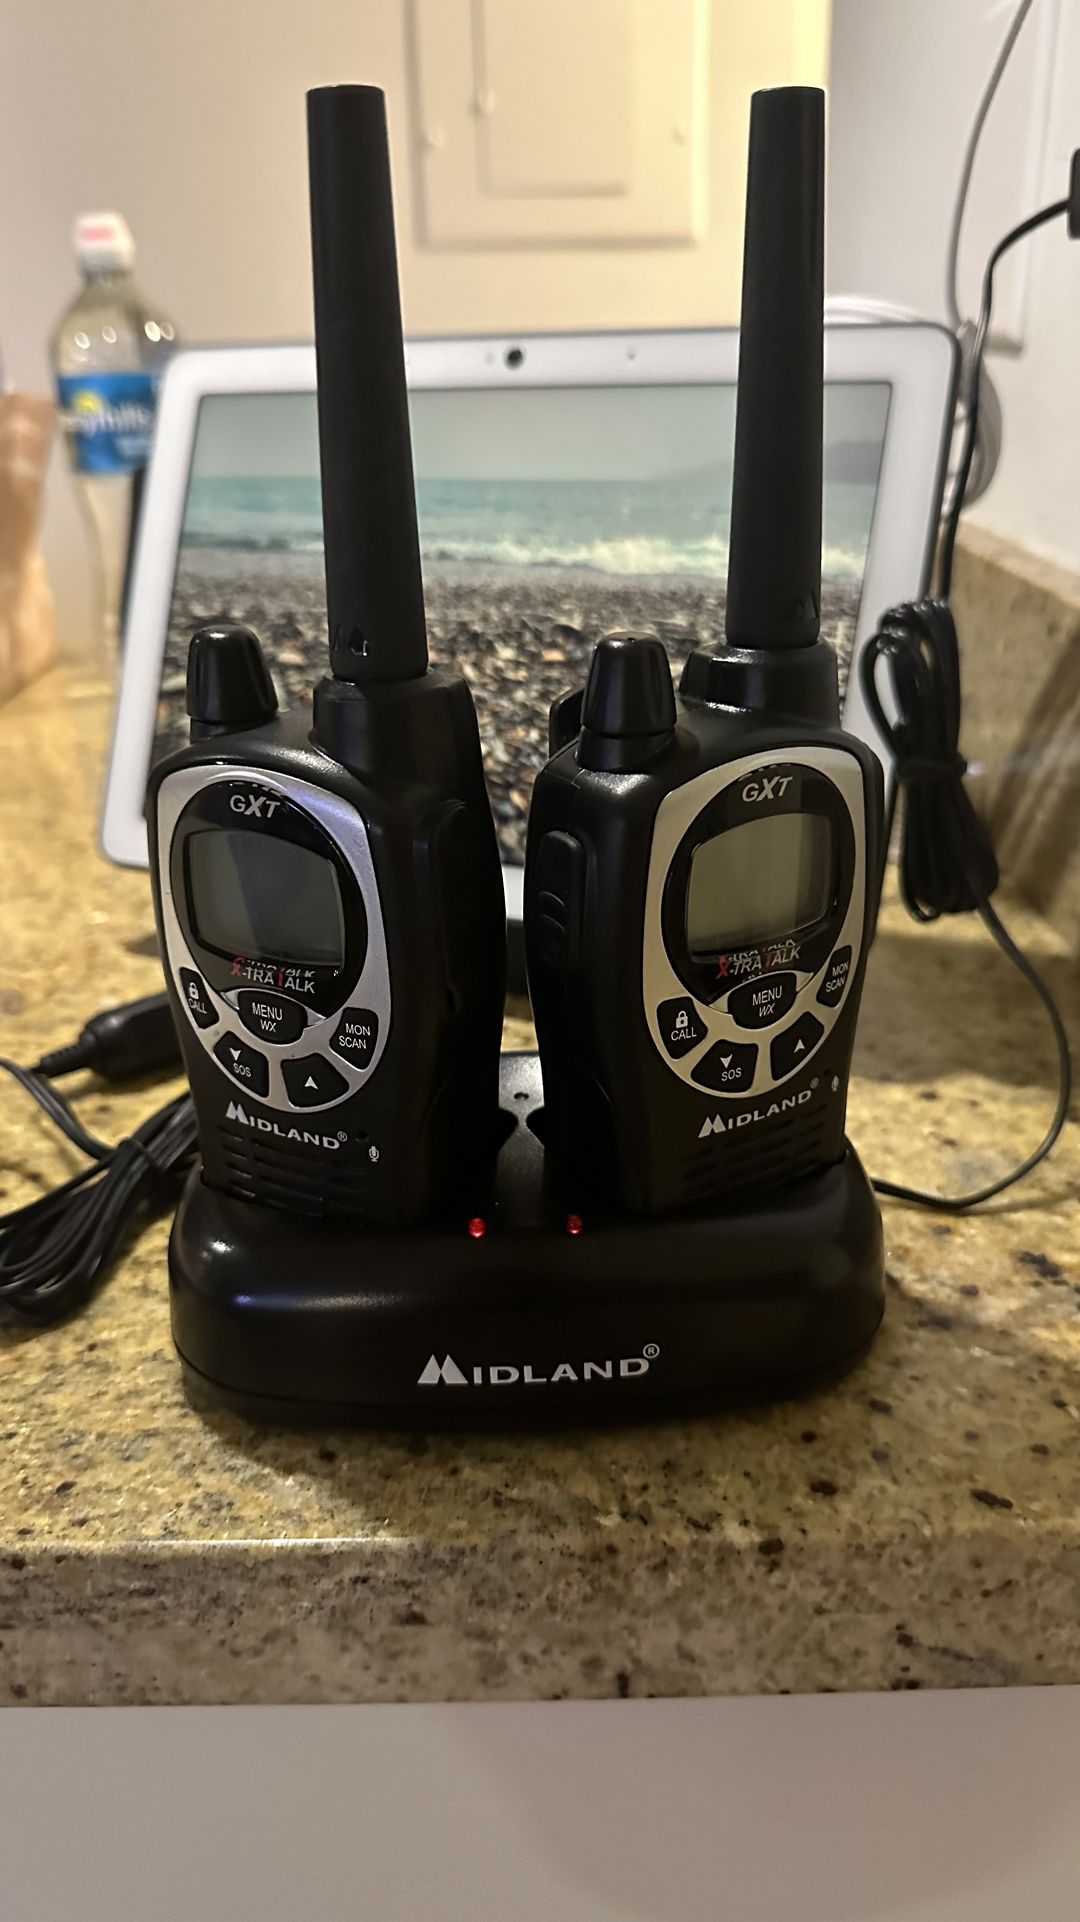 Midland 50 Channel GMRS Two-Way Radio Long Range Walkie Talkie with 142  Privacy Codes, SOS Siren, and NOAA Weather Alerts and Weather Scan (Black/Si  for Sale in Sunny Isles Beach, FL